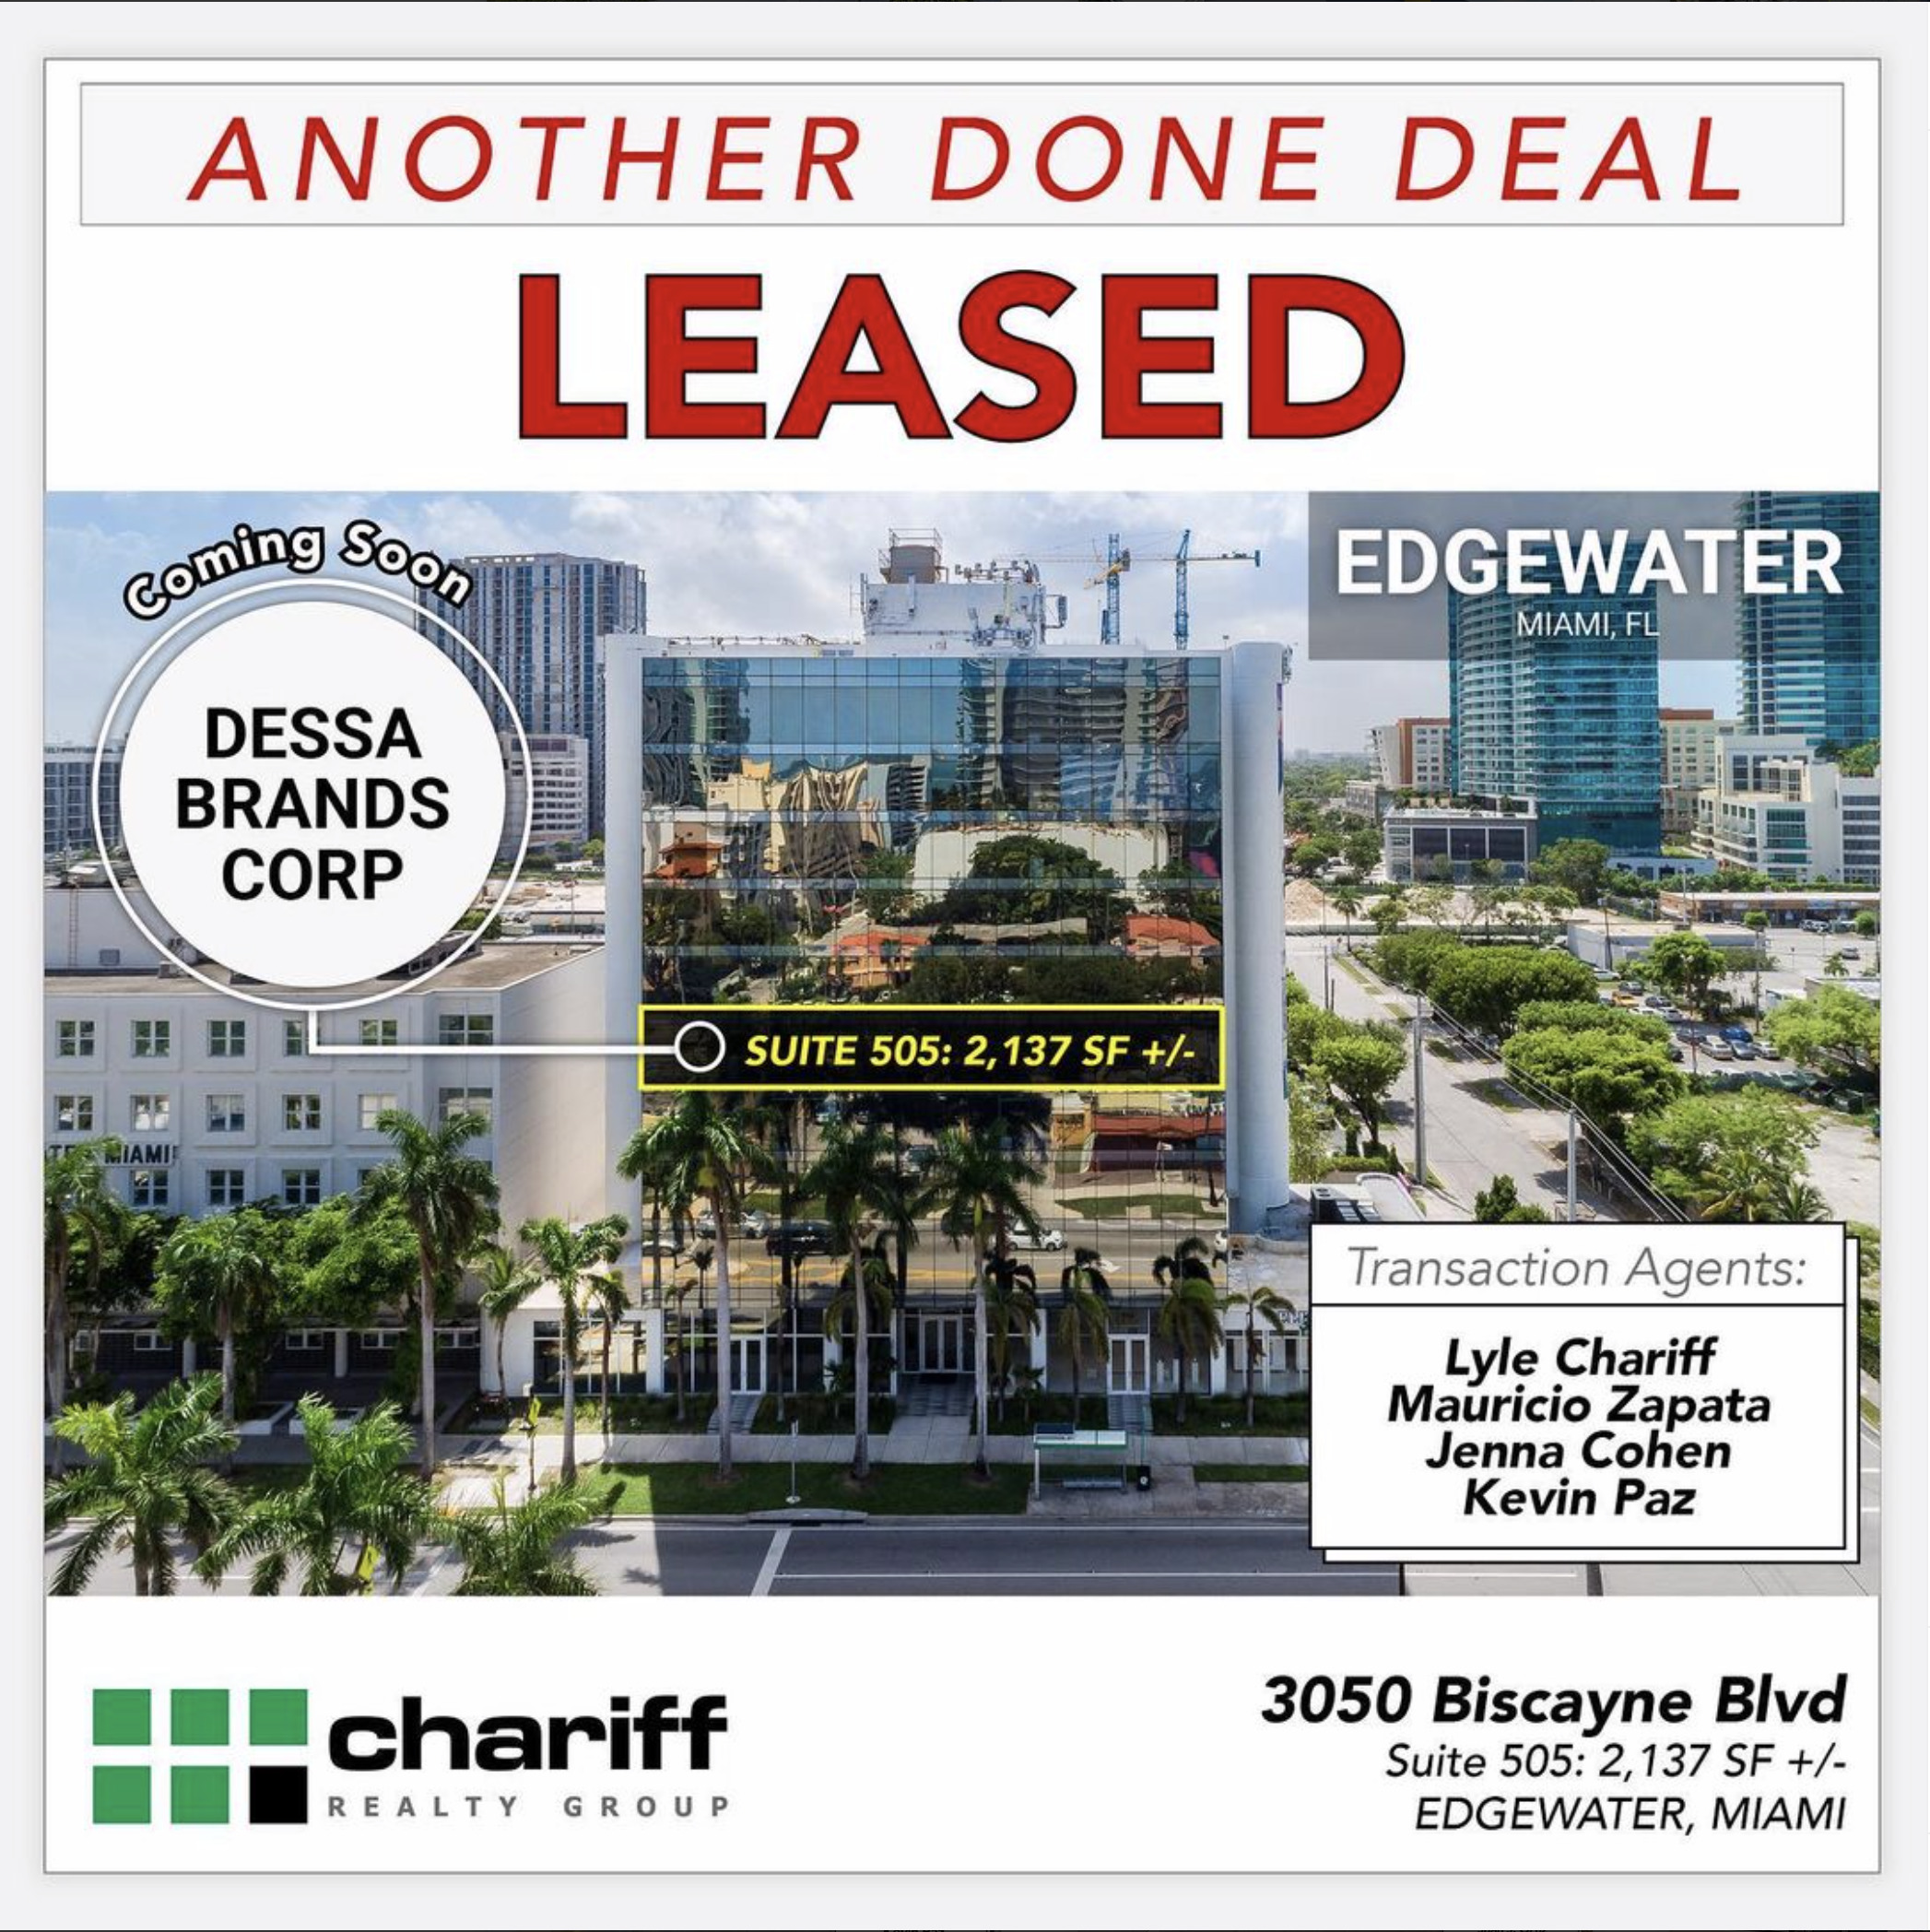 3050 Biscayne Blvd suite 502 - Another Done Deal - Leased - Edgewater - Miami-Florida-33137-Chariff Realty Group